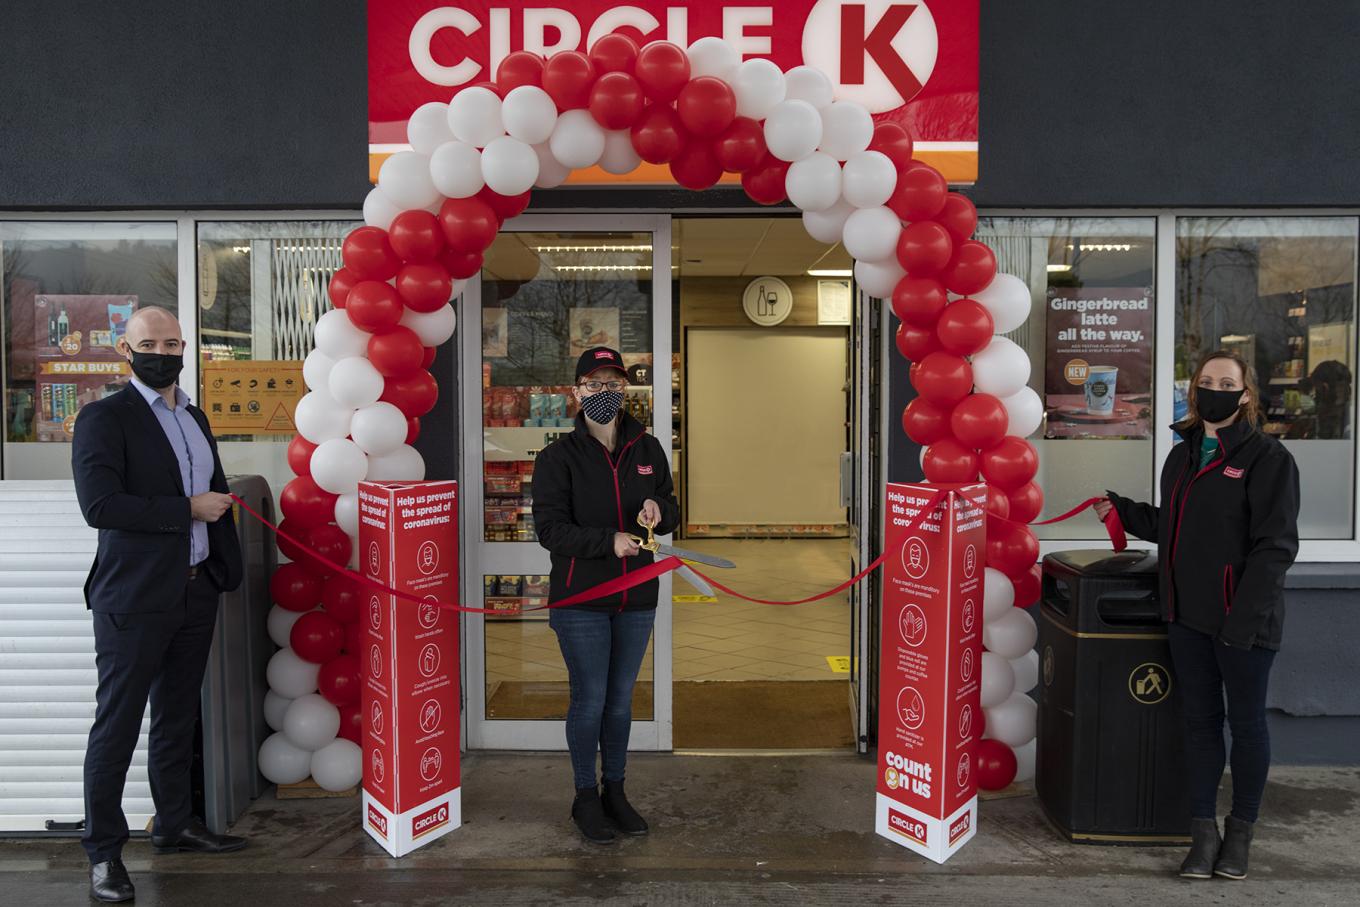 Circle K Autopower in Carrick on Suir, Co. Tipperary